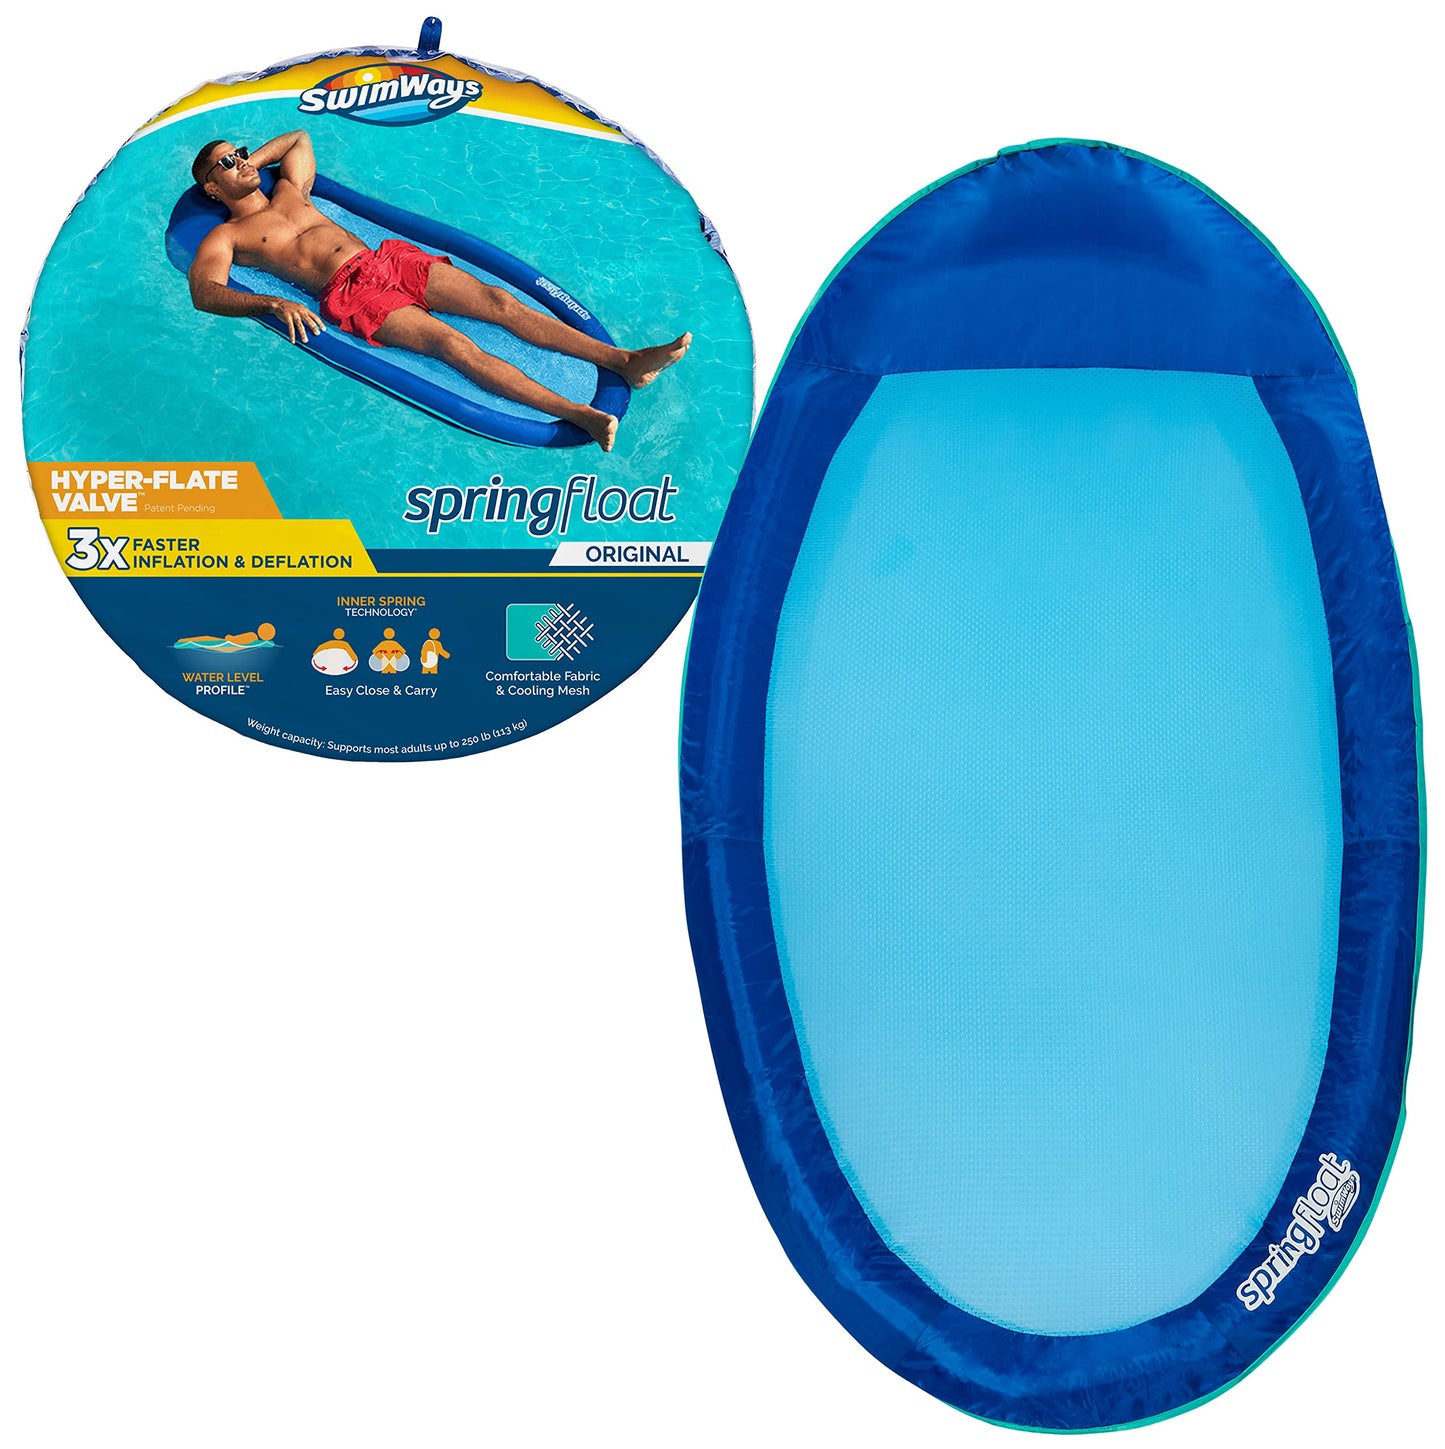 SwimWays Spring Float Original Pool Lounge Chair with Hyper-Flate Valve, Blue